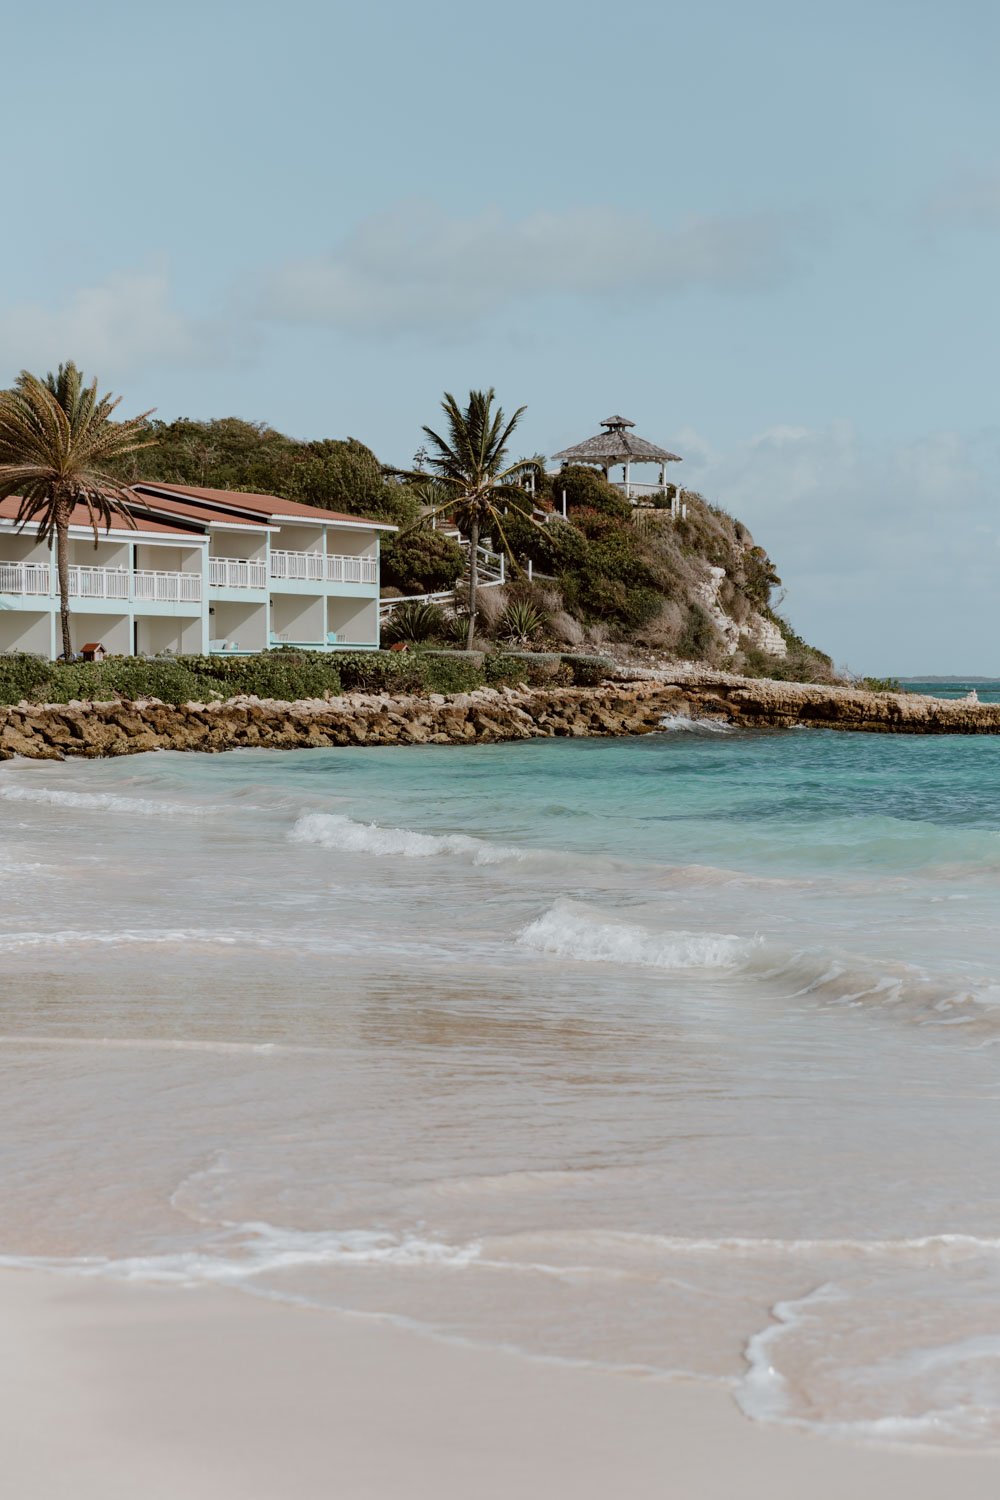 Things to do in Antigua - Stay in a luxury all inclusive